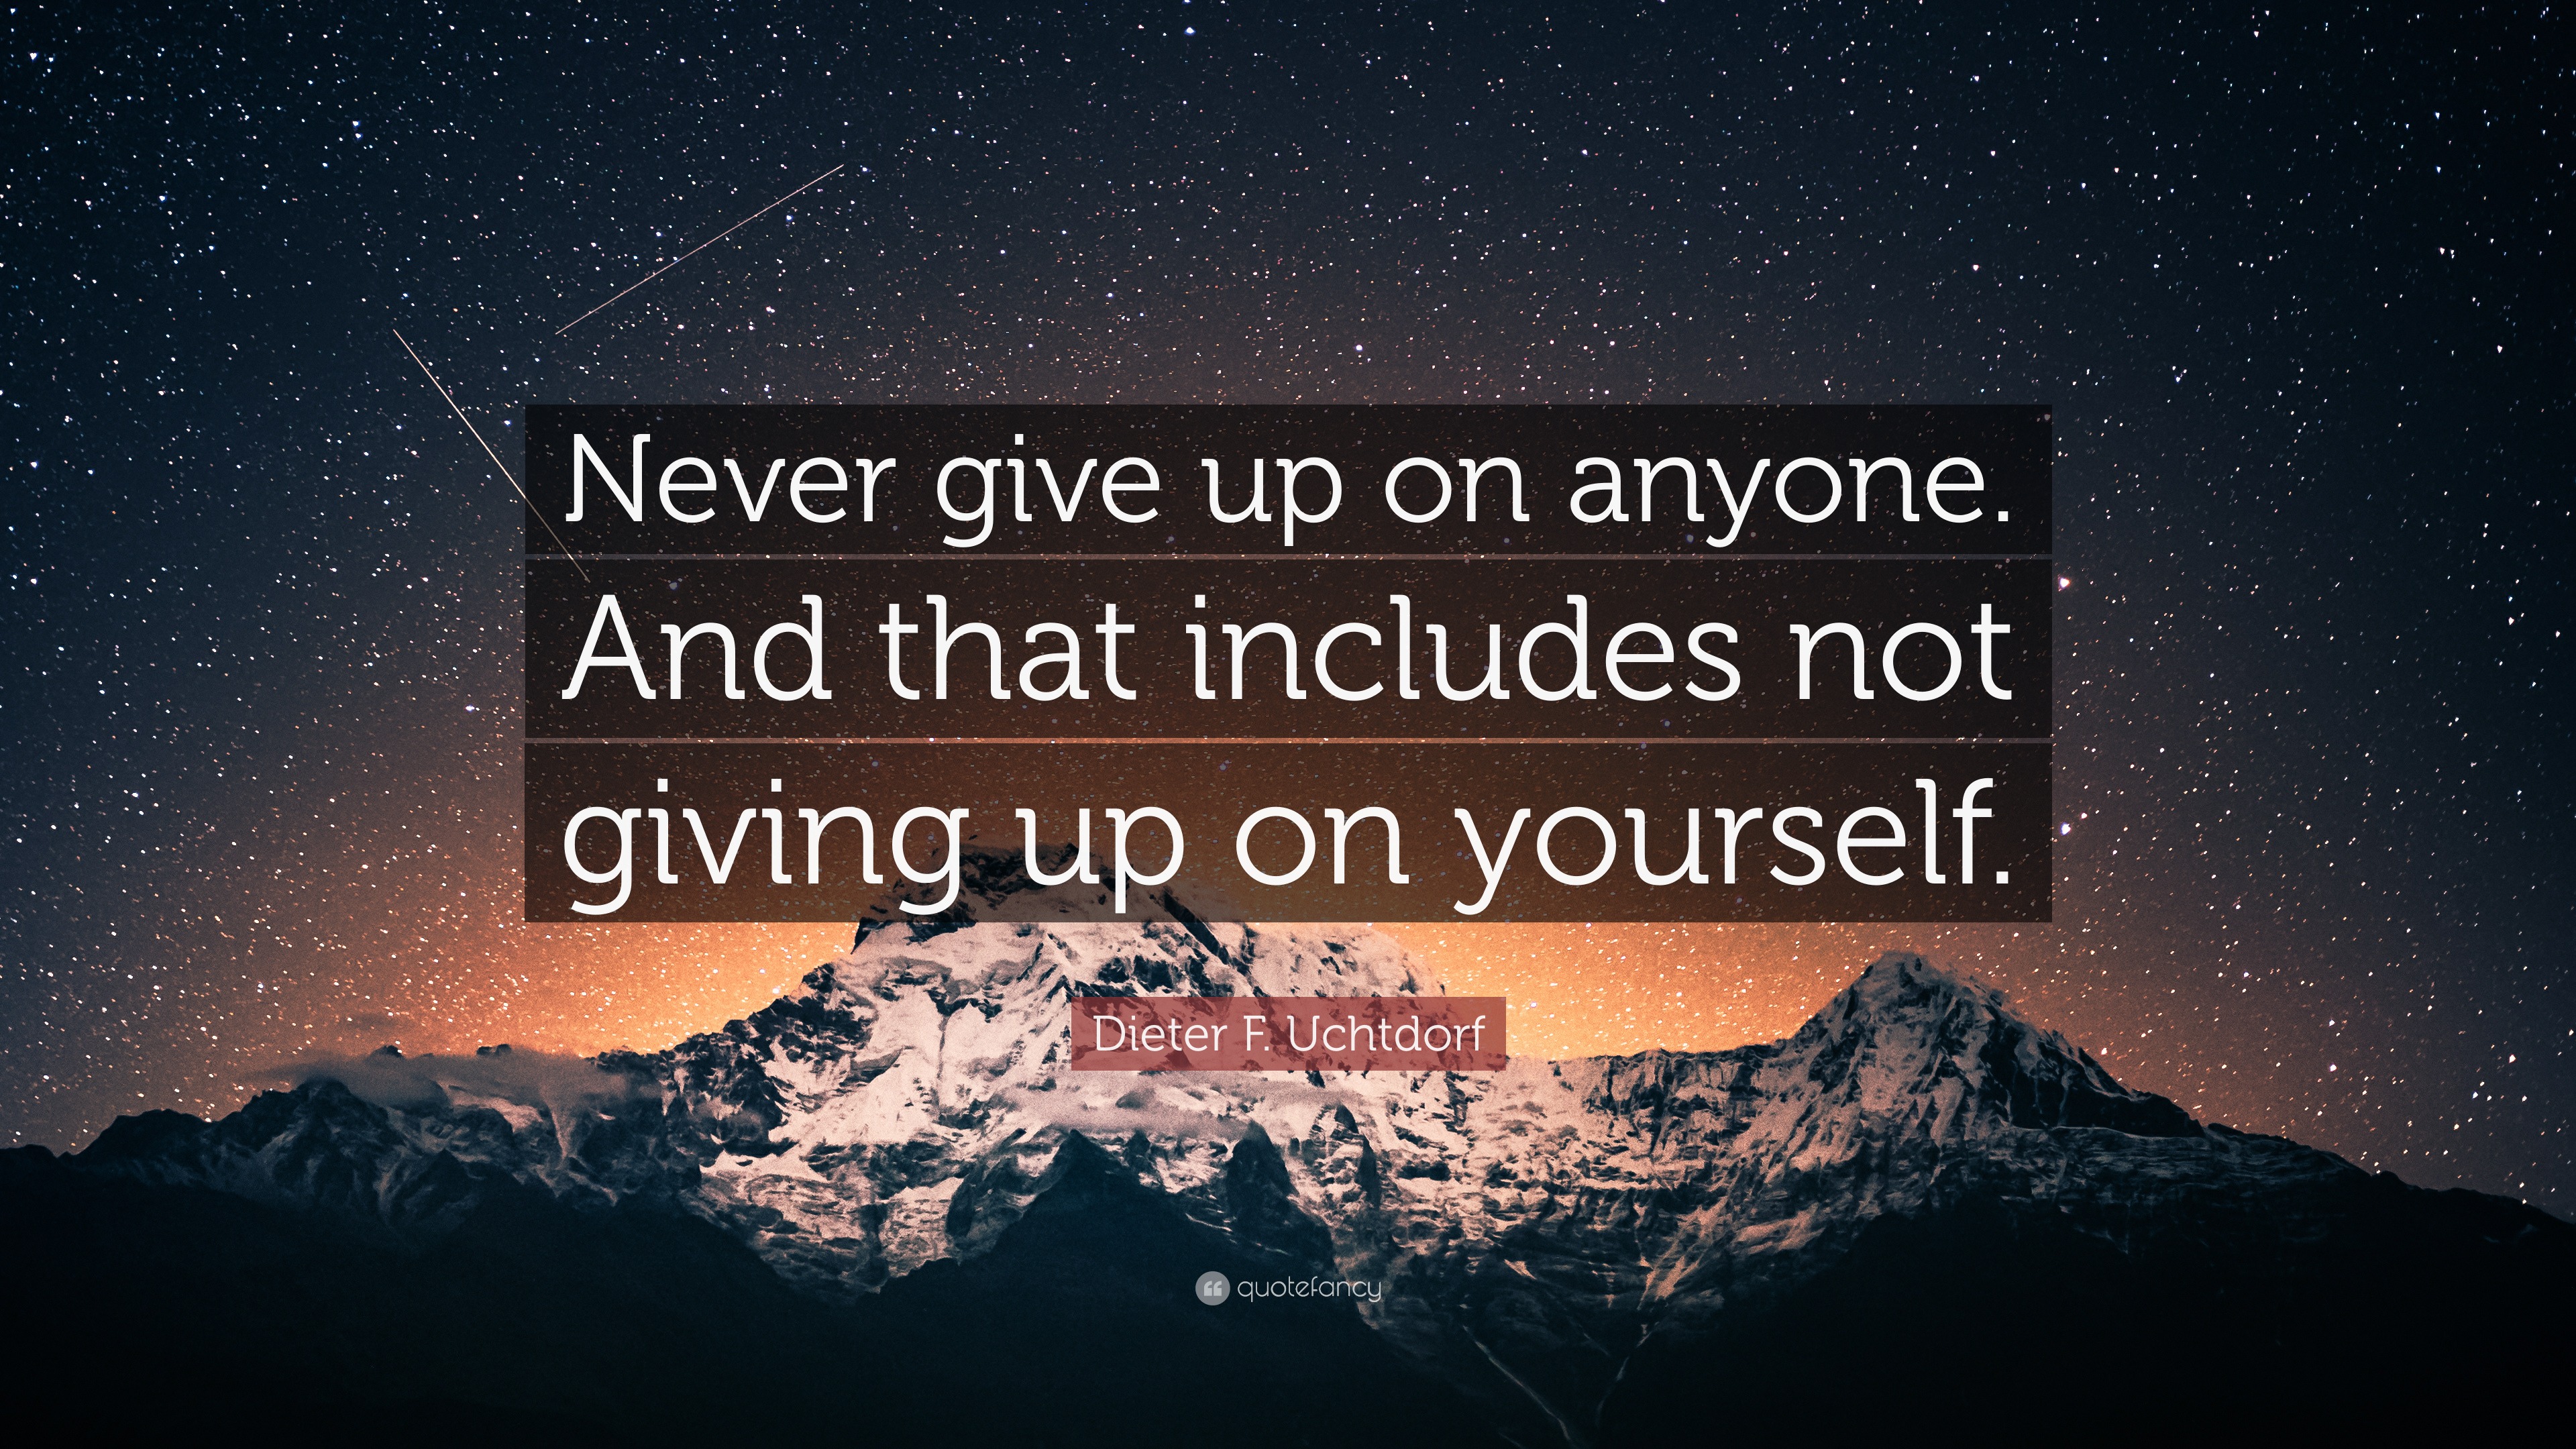 Quotes About Not Giving Up On Yourself